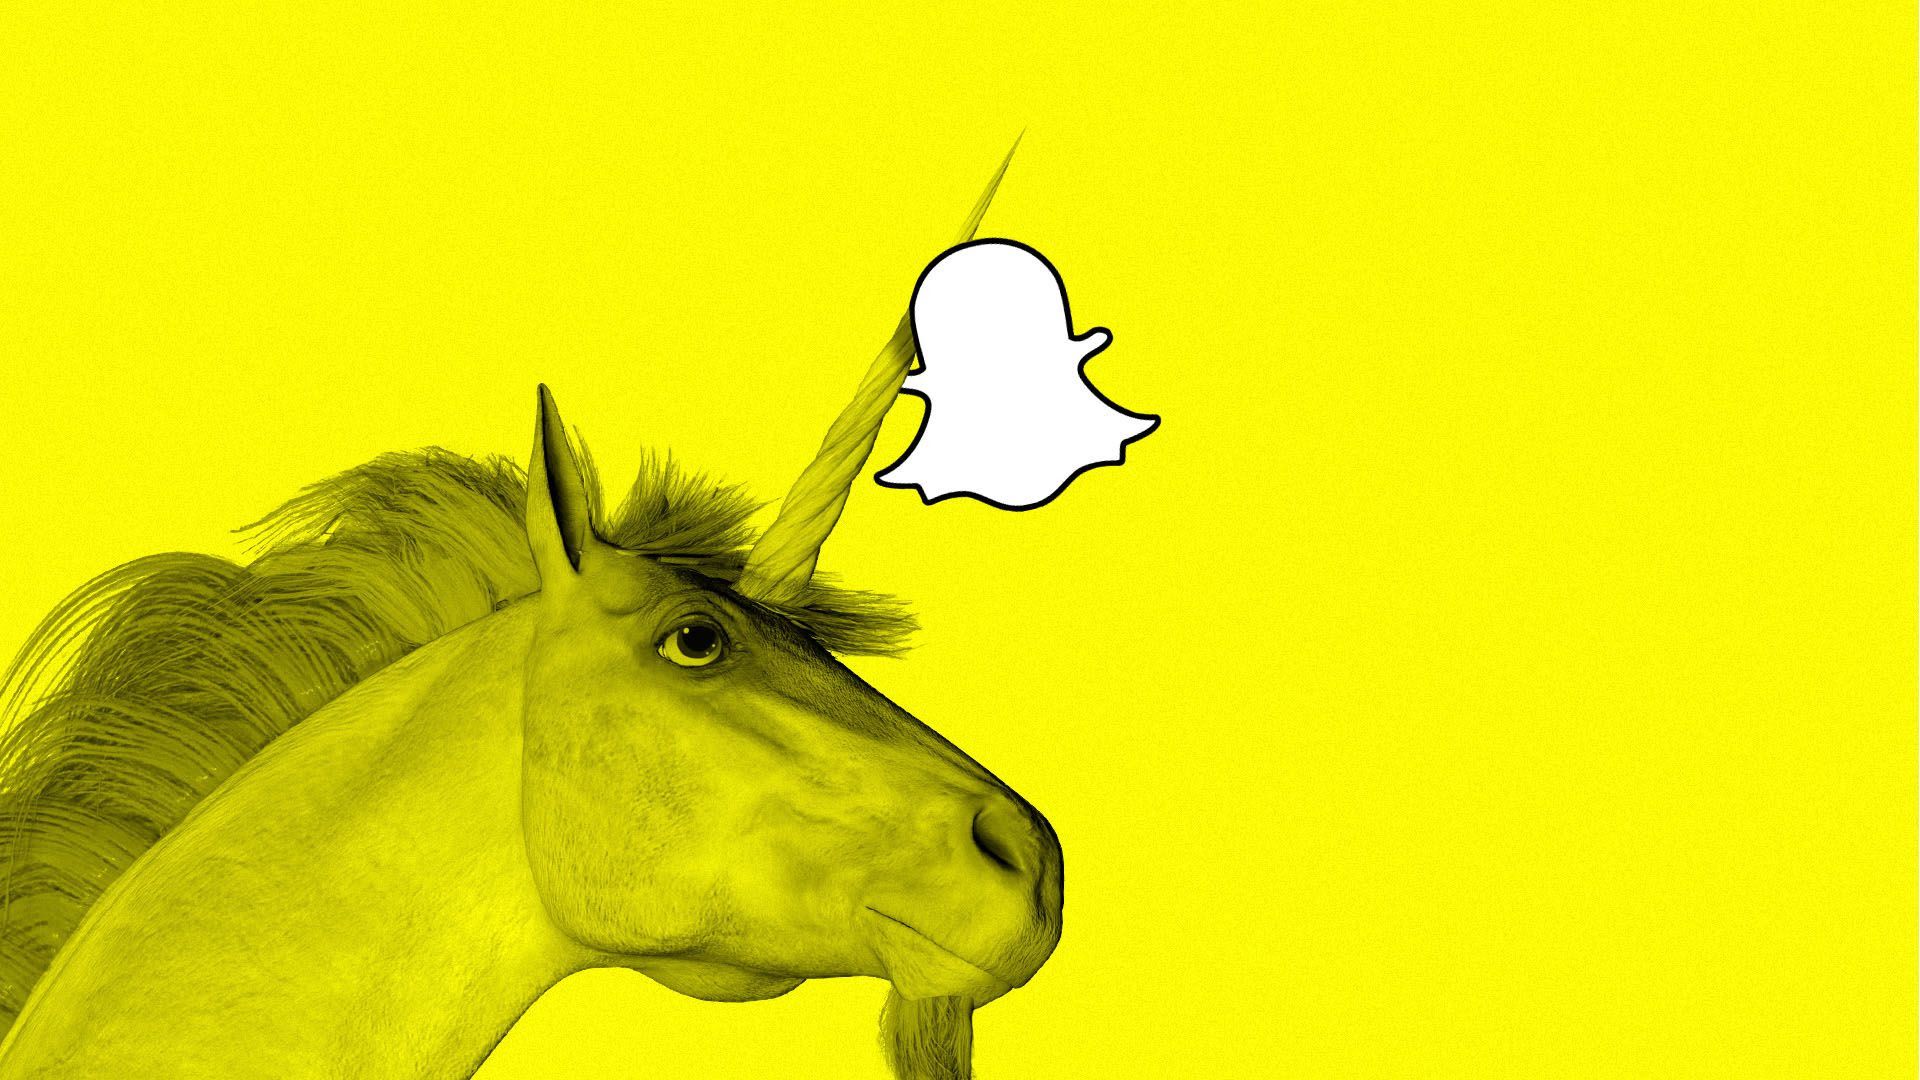 A unicorn carries the Snapchat symbol by its horns